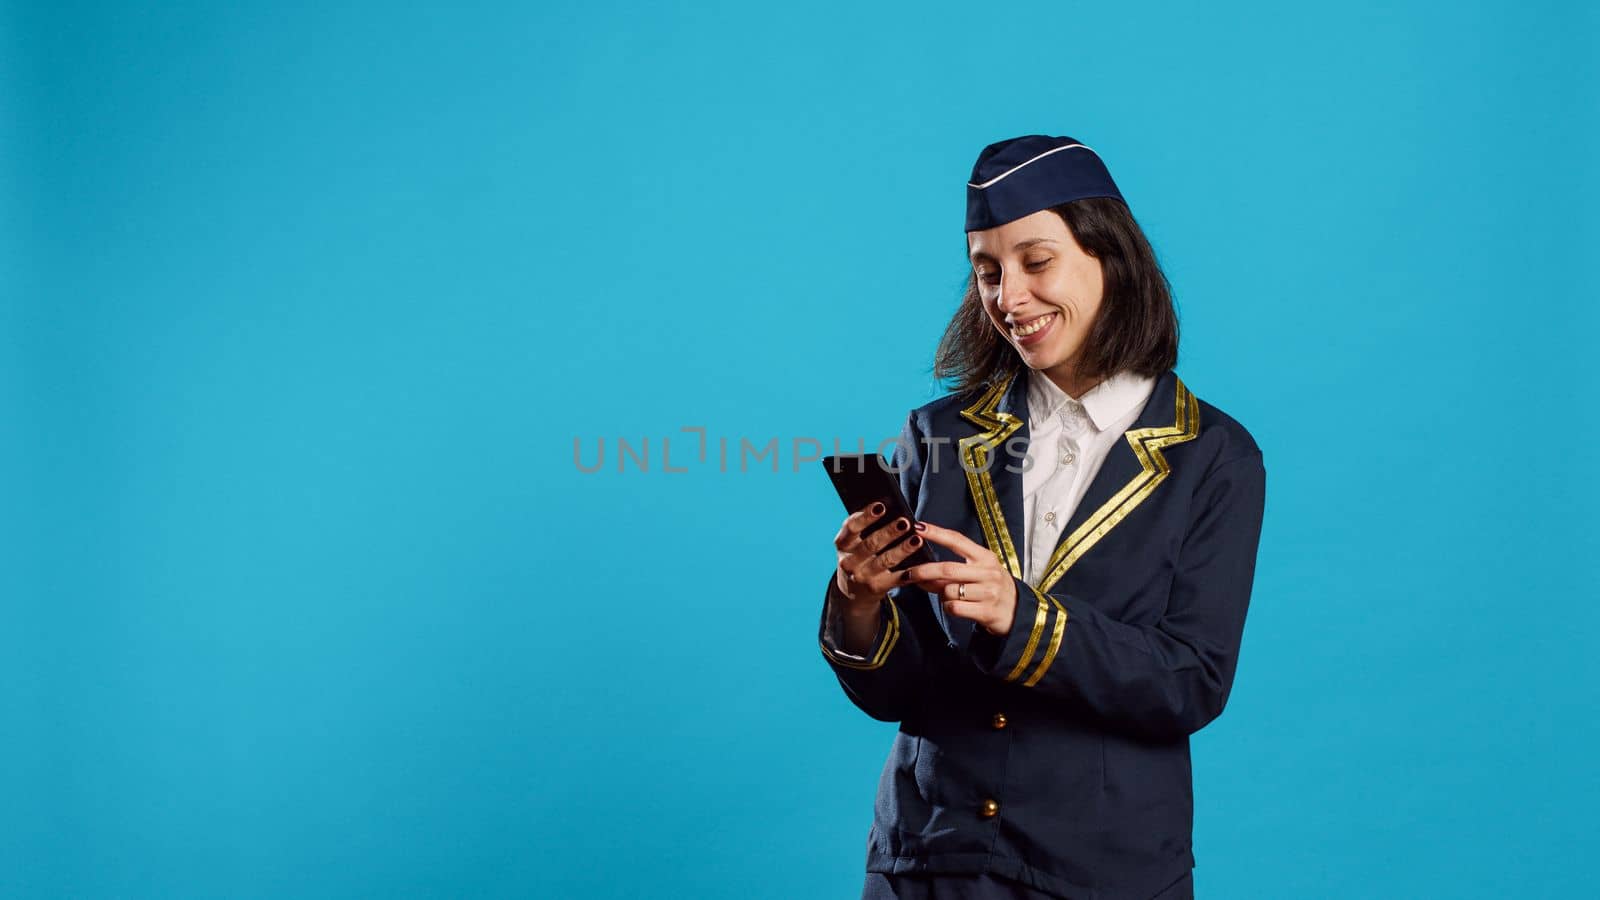 Aircrew member browsing online website on camera, using smartphone for social media app. Young air hostess in flying uniform playing with mobile phone and online browser over blue backdrop.